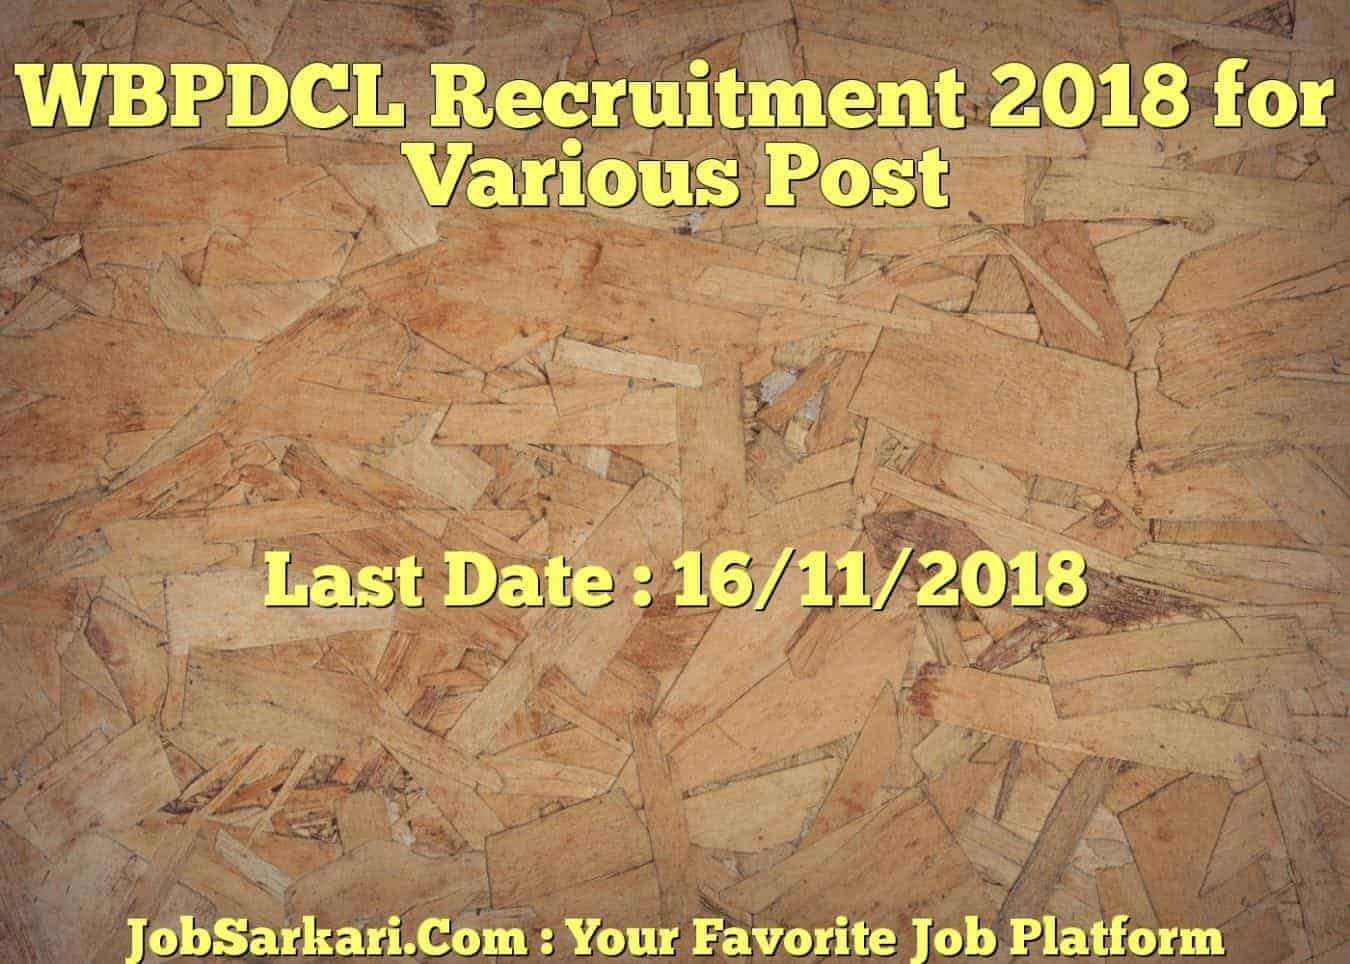 WBPDCL Recruitment 2018 for Various Post